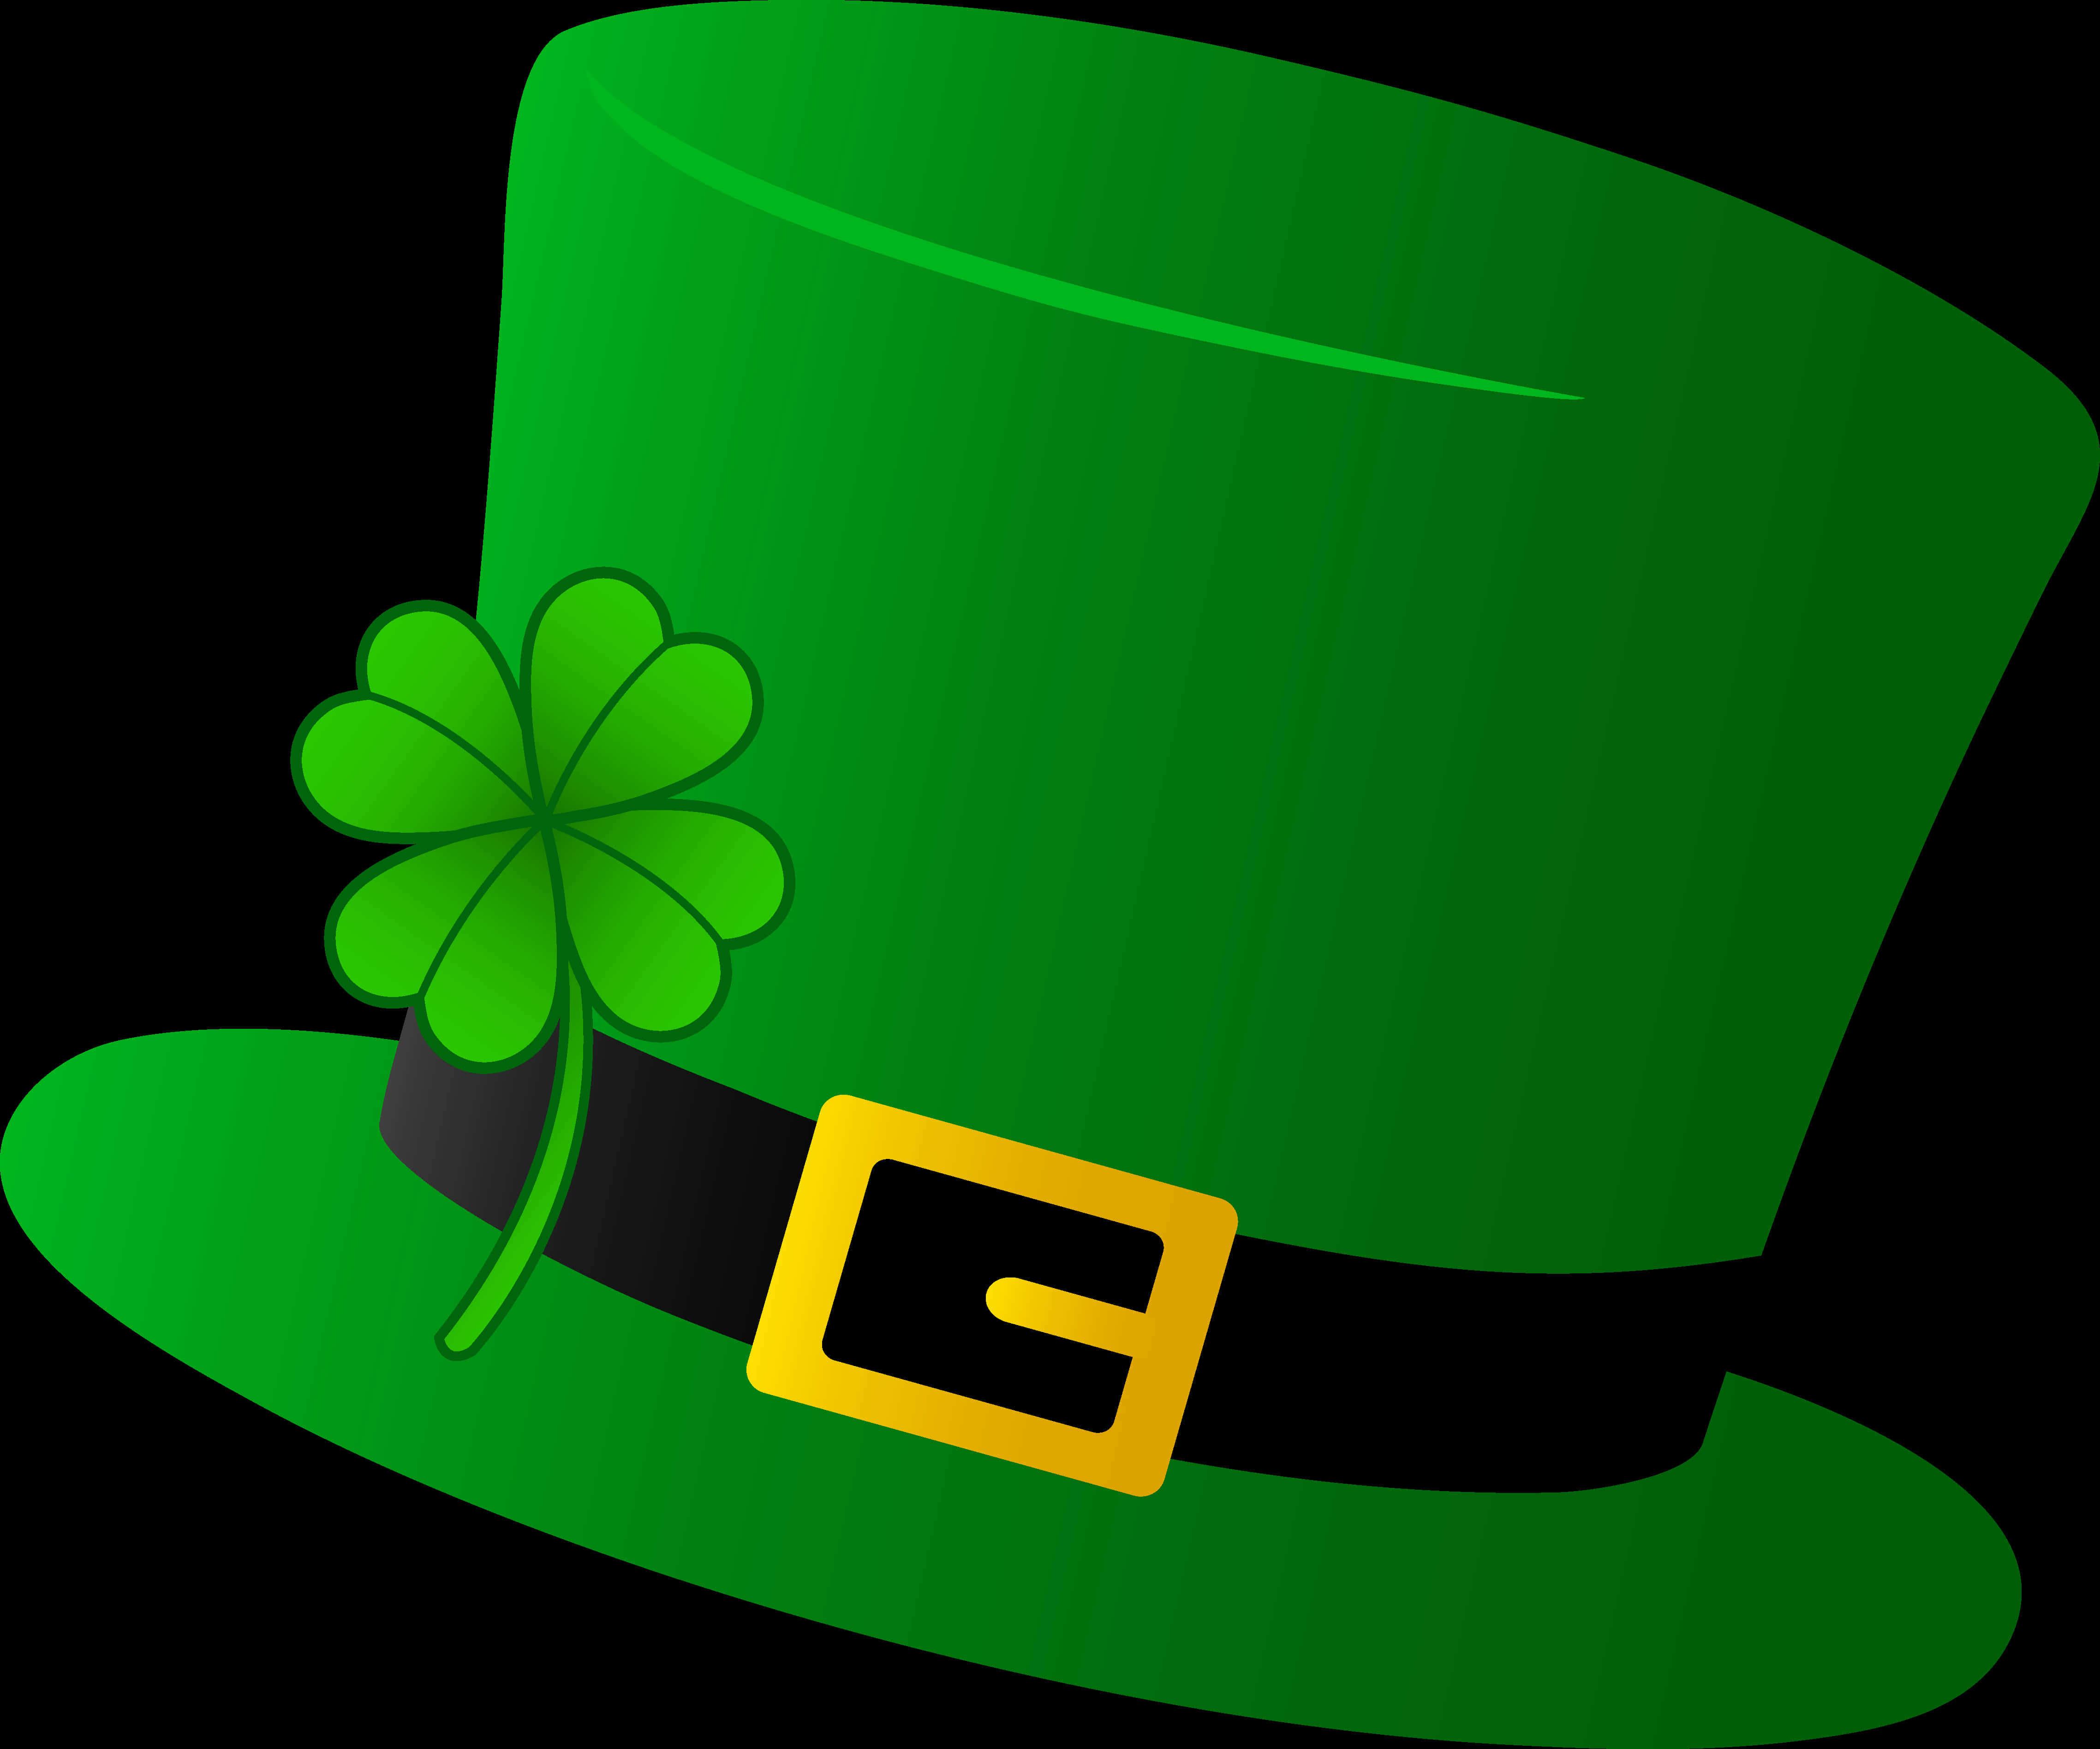 A Green Hat With A Black Belt And A Clover On It